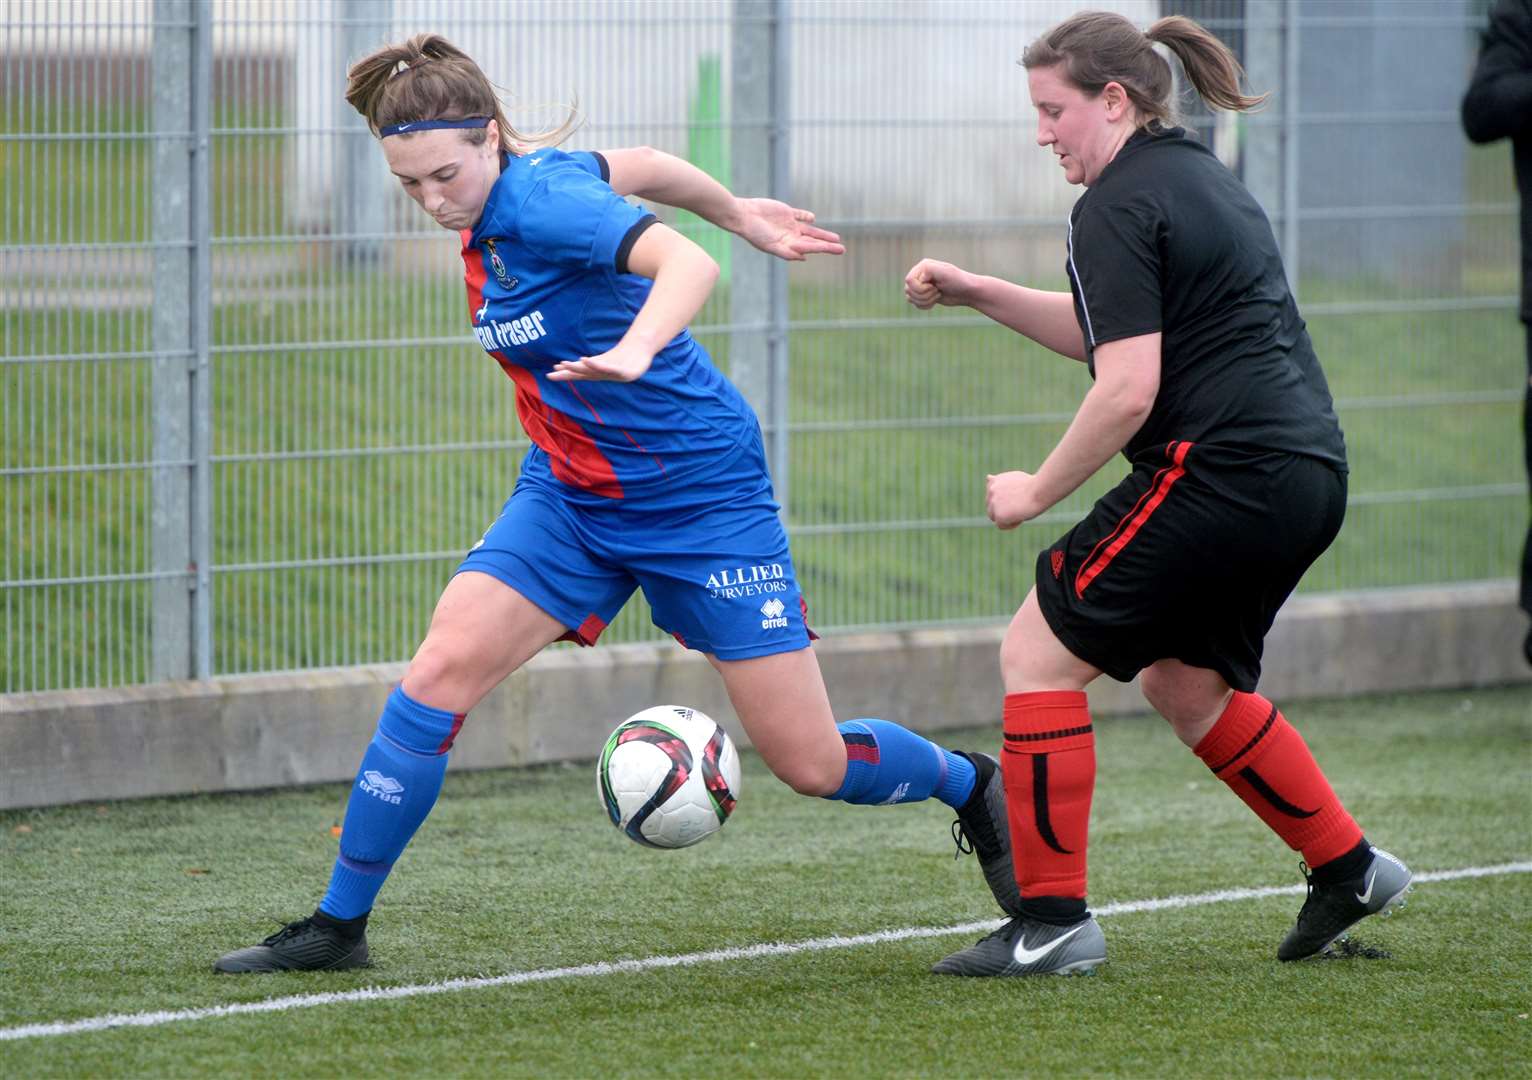 Katie Cleland scored her first goal after a lengthy injury lay-off for Inverness last weekend.